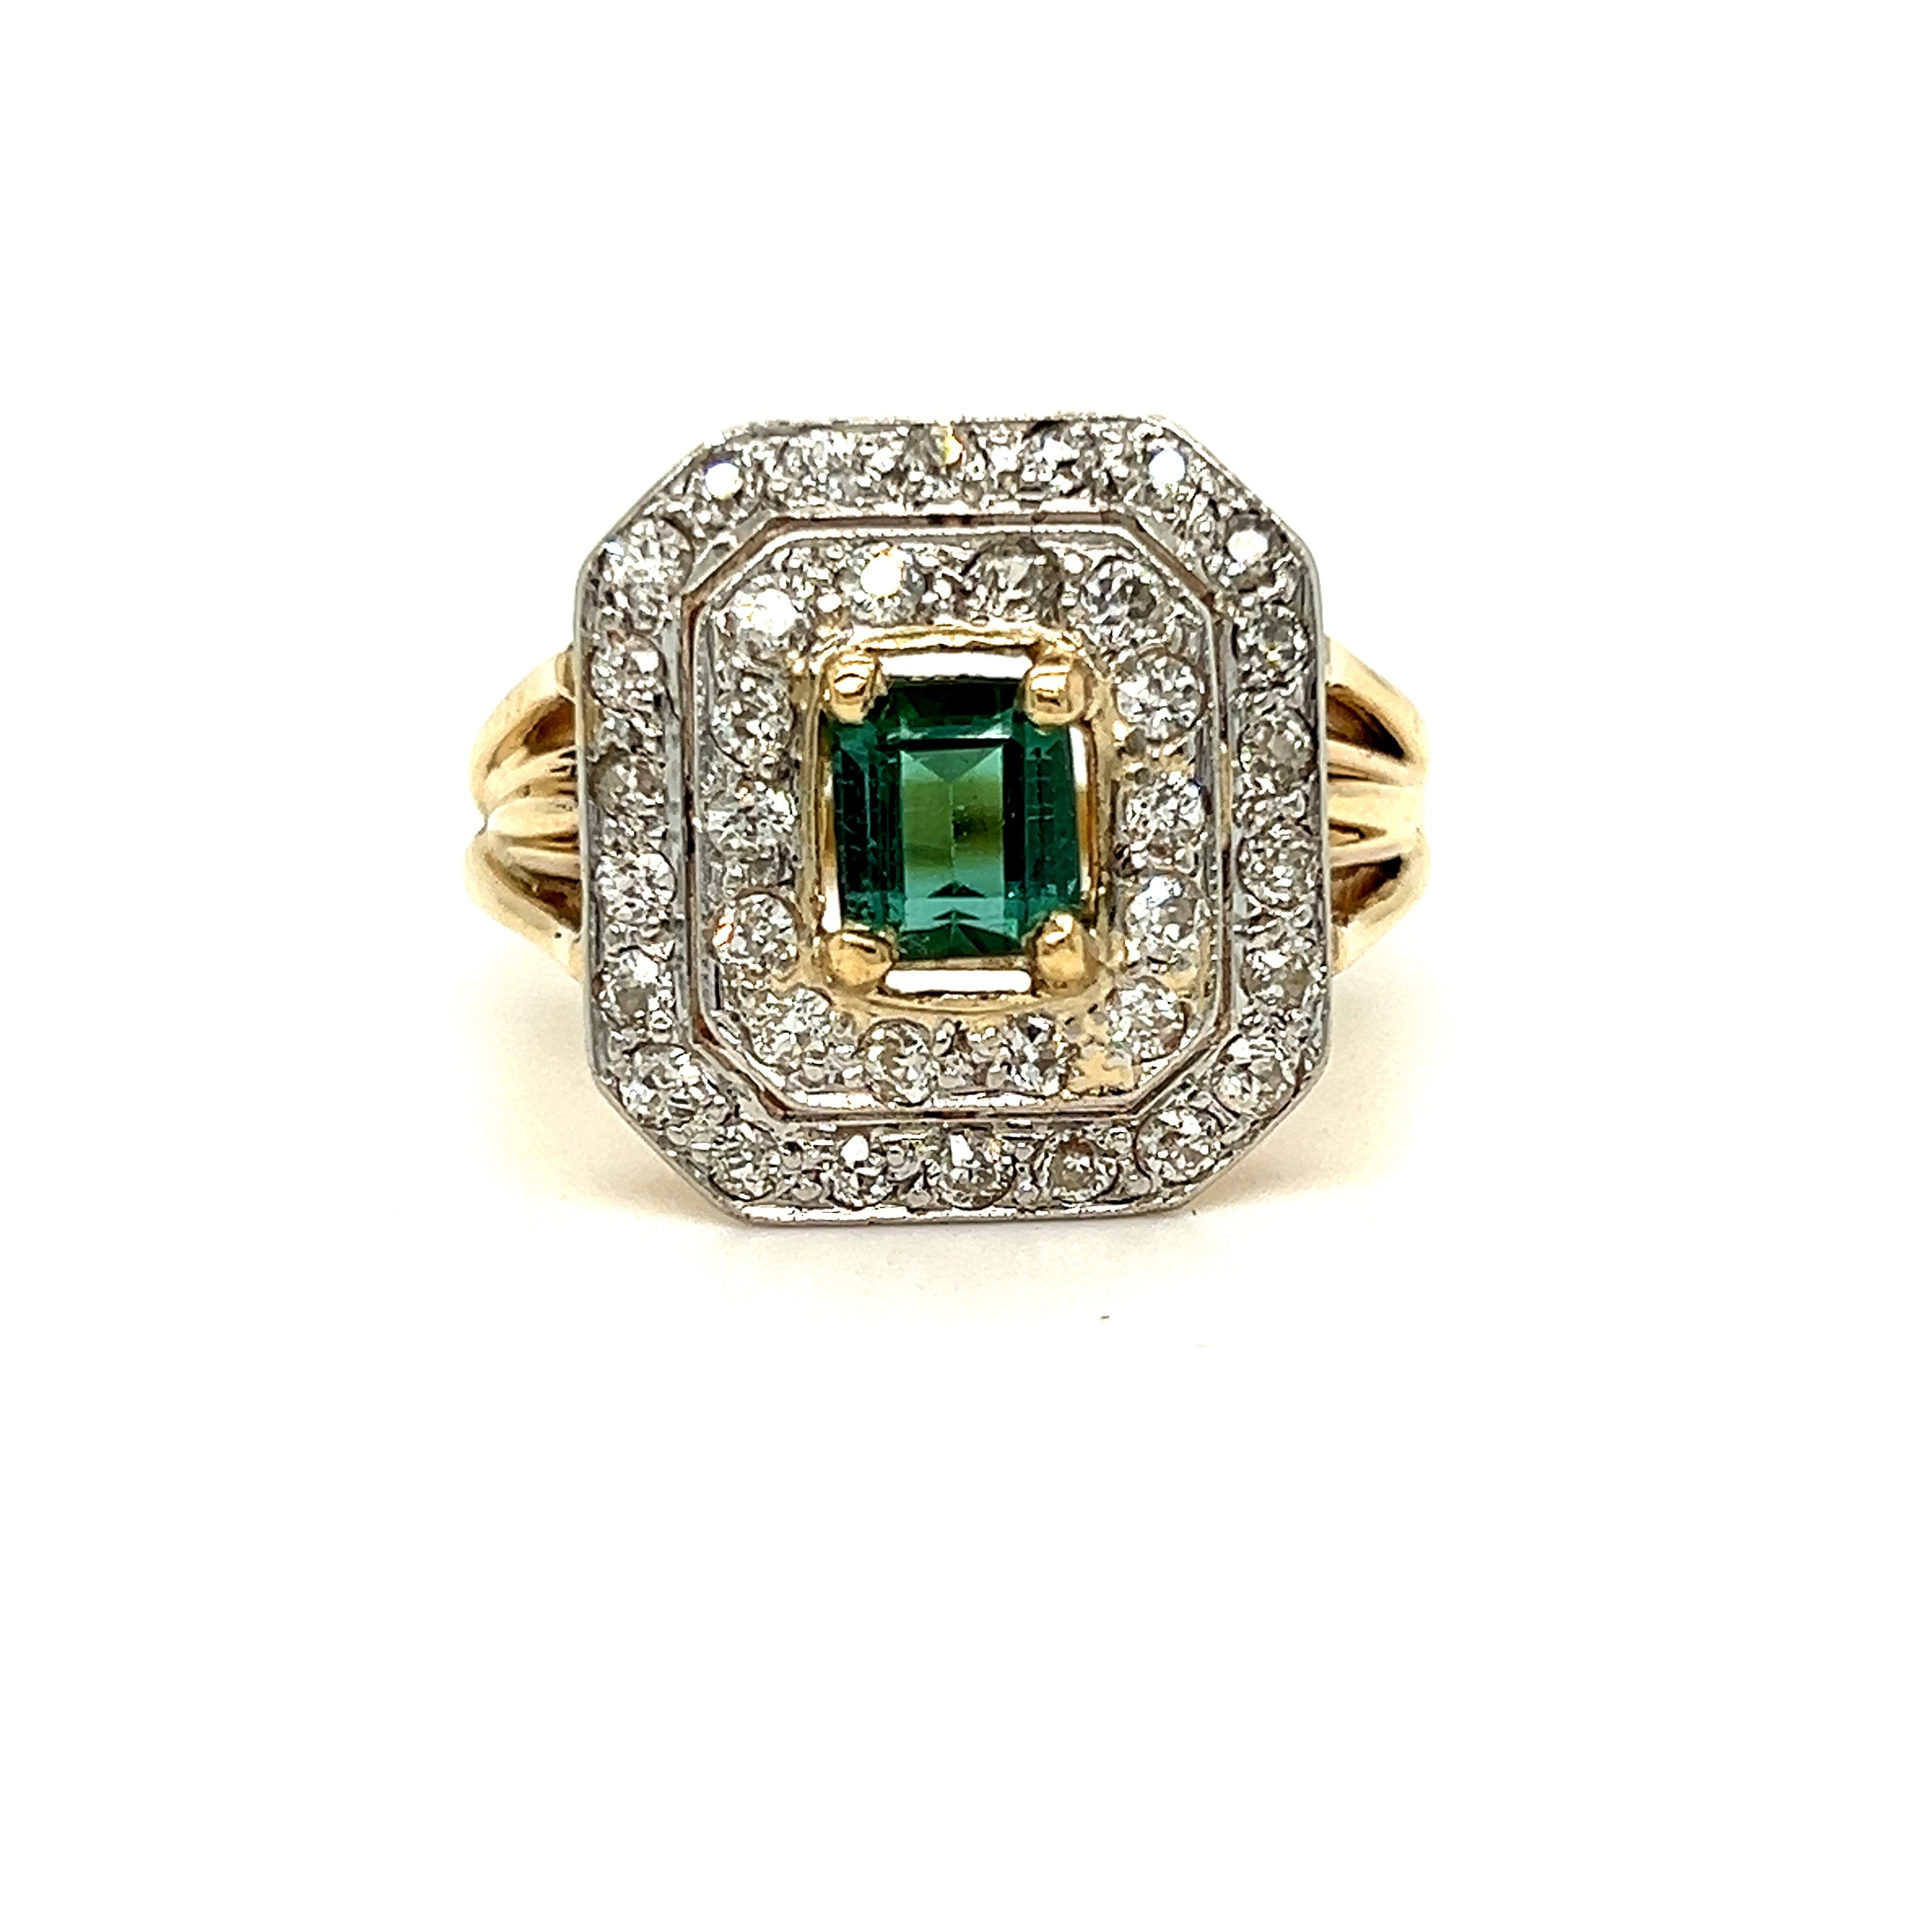 Antique 14K Yellow Gold Double Diamond Halo and Tourmaline Ring Engagement Ring - 2.34ct.